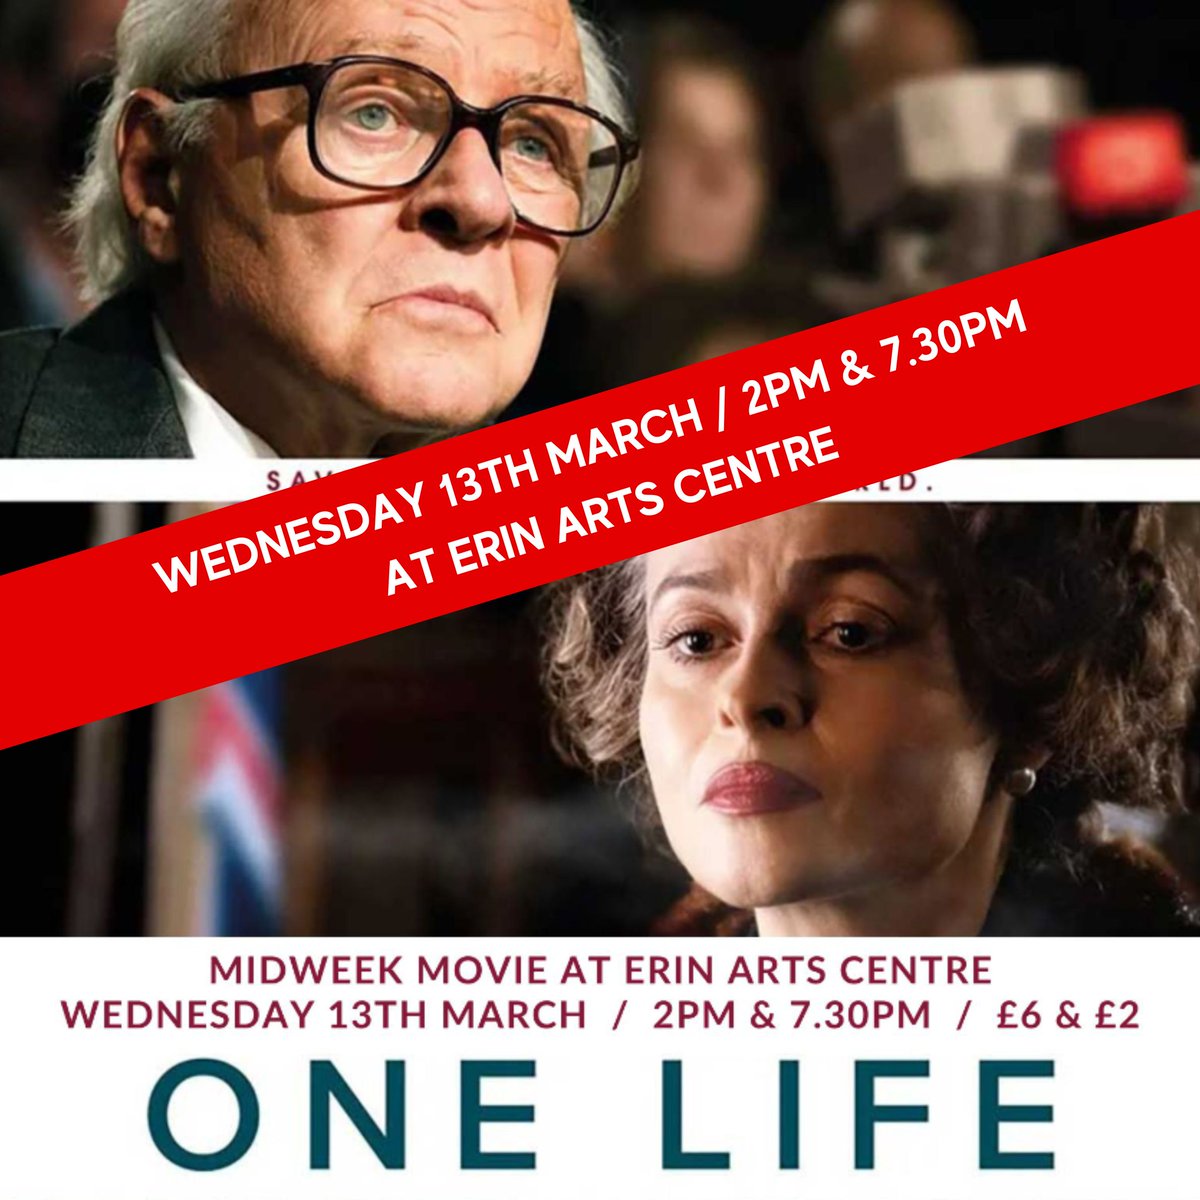 We're screening the incredible real-life story One Life this week - 2pm & 7.30pm screenings on Wed 13th March. Book online or buy tickets at the door: ticketsource.co.uk/erinartscentre #erinartscentre #porterin #isleofman #onelife #anthoynhopkins #helenabonhamcarter